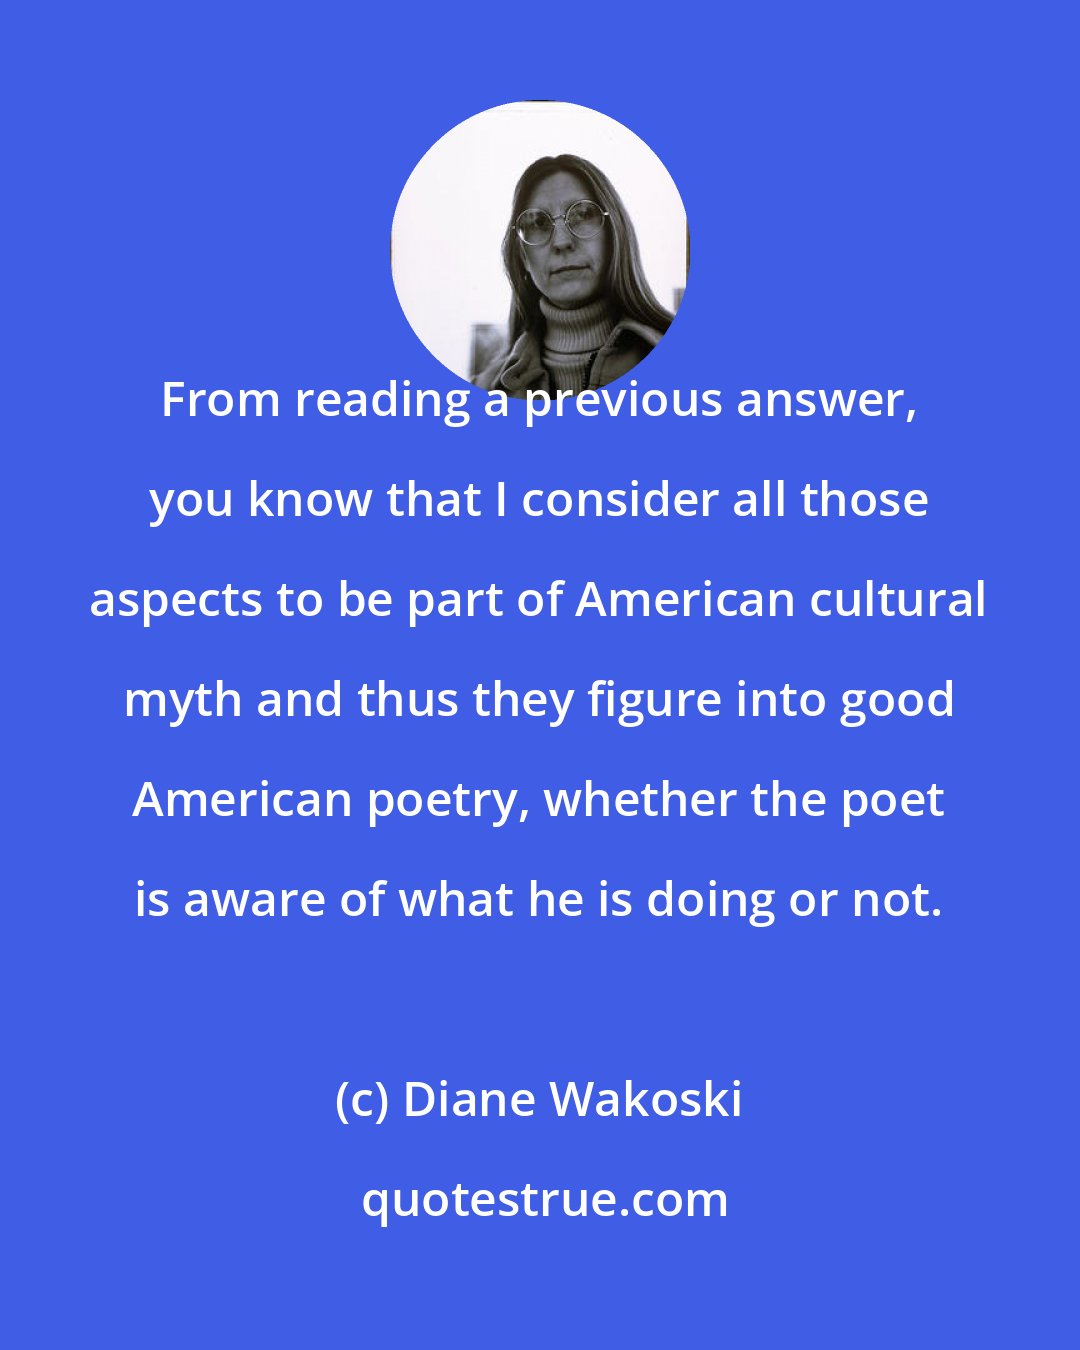 Diane Wakoski: From reading a previous answer, you know that I consider all those aspects to be part of American cultural myth and thus they figure into good American poetry, whether the poet is aware of what he is doing or not.